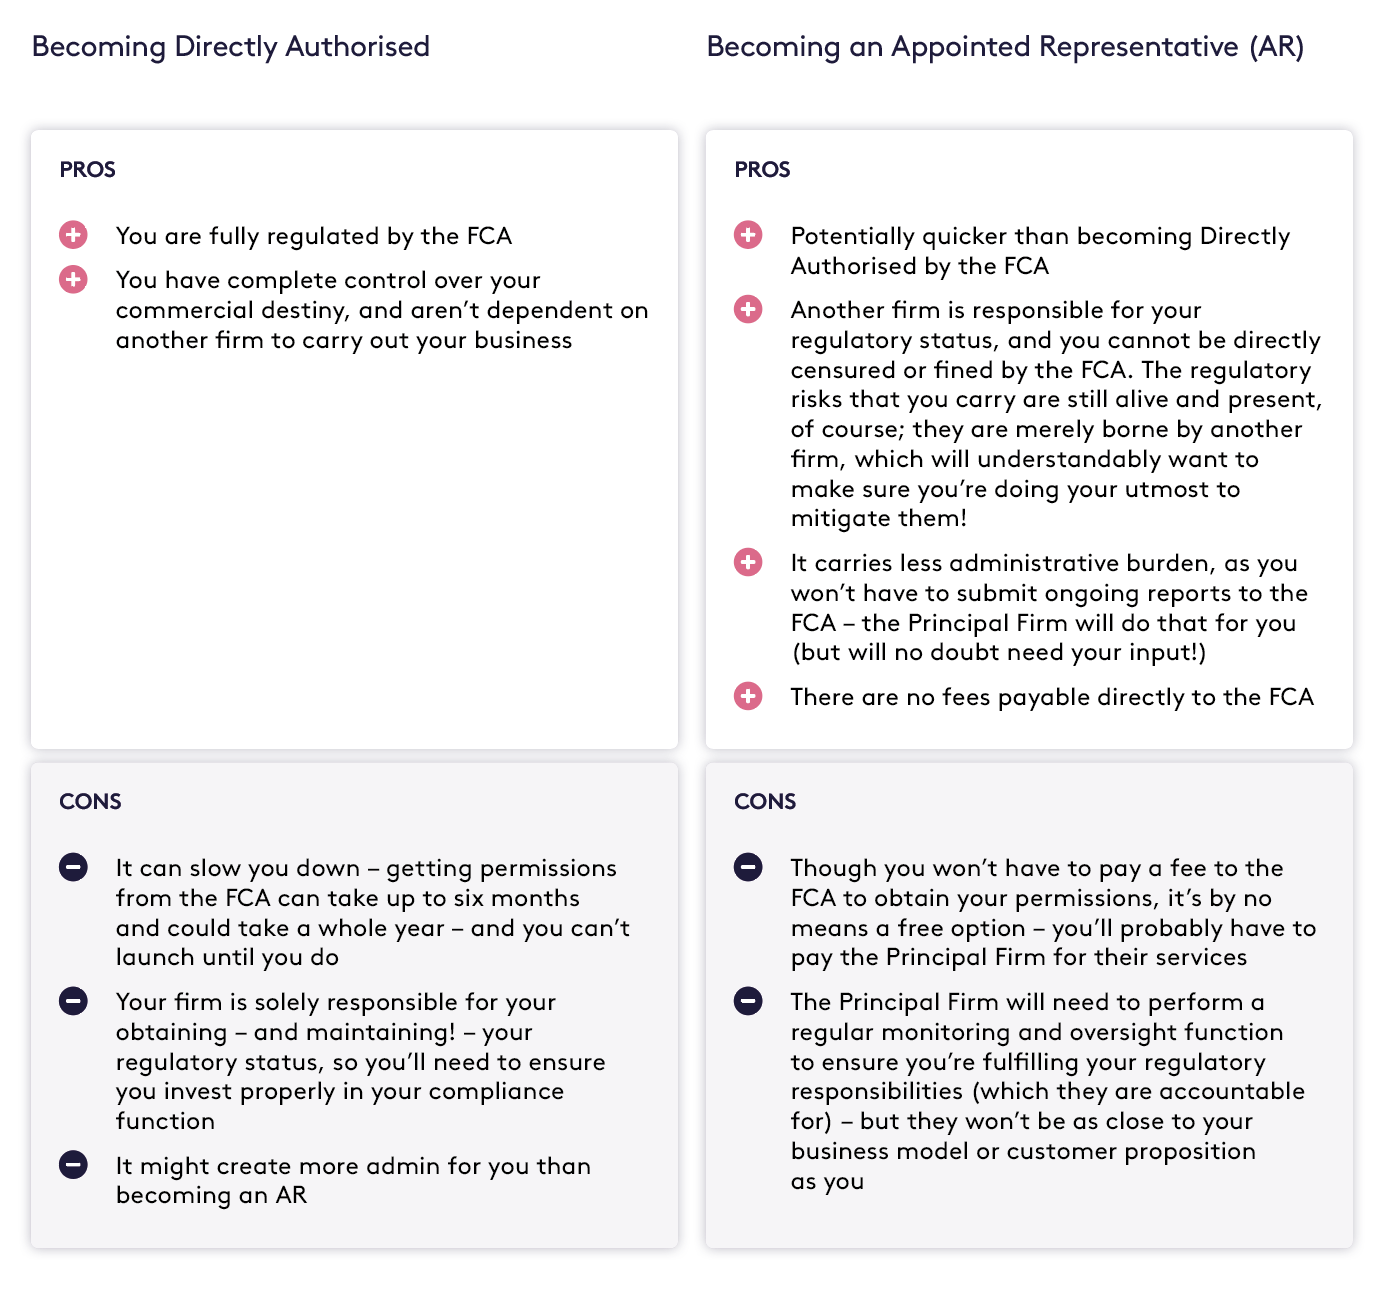 Pros and Cons of becoming directly authorised vs becoming an Appointed Representative (AR)